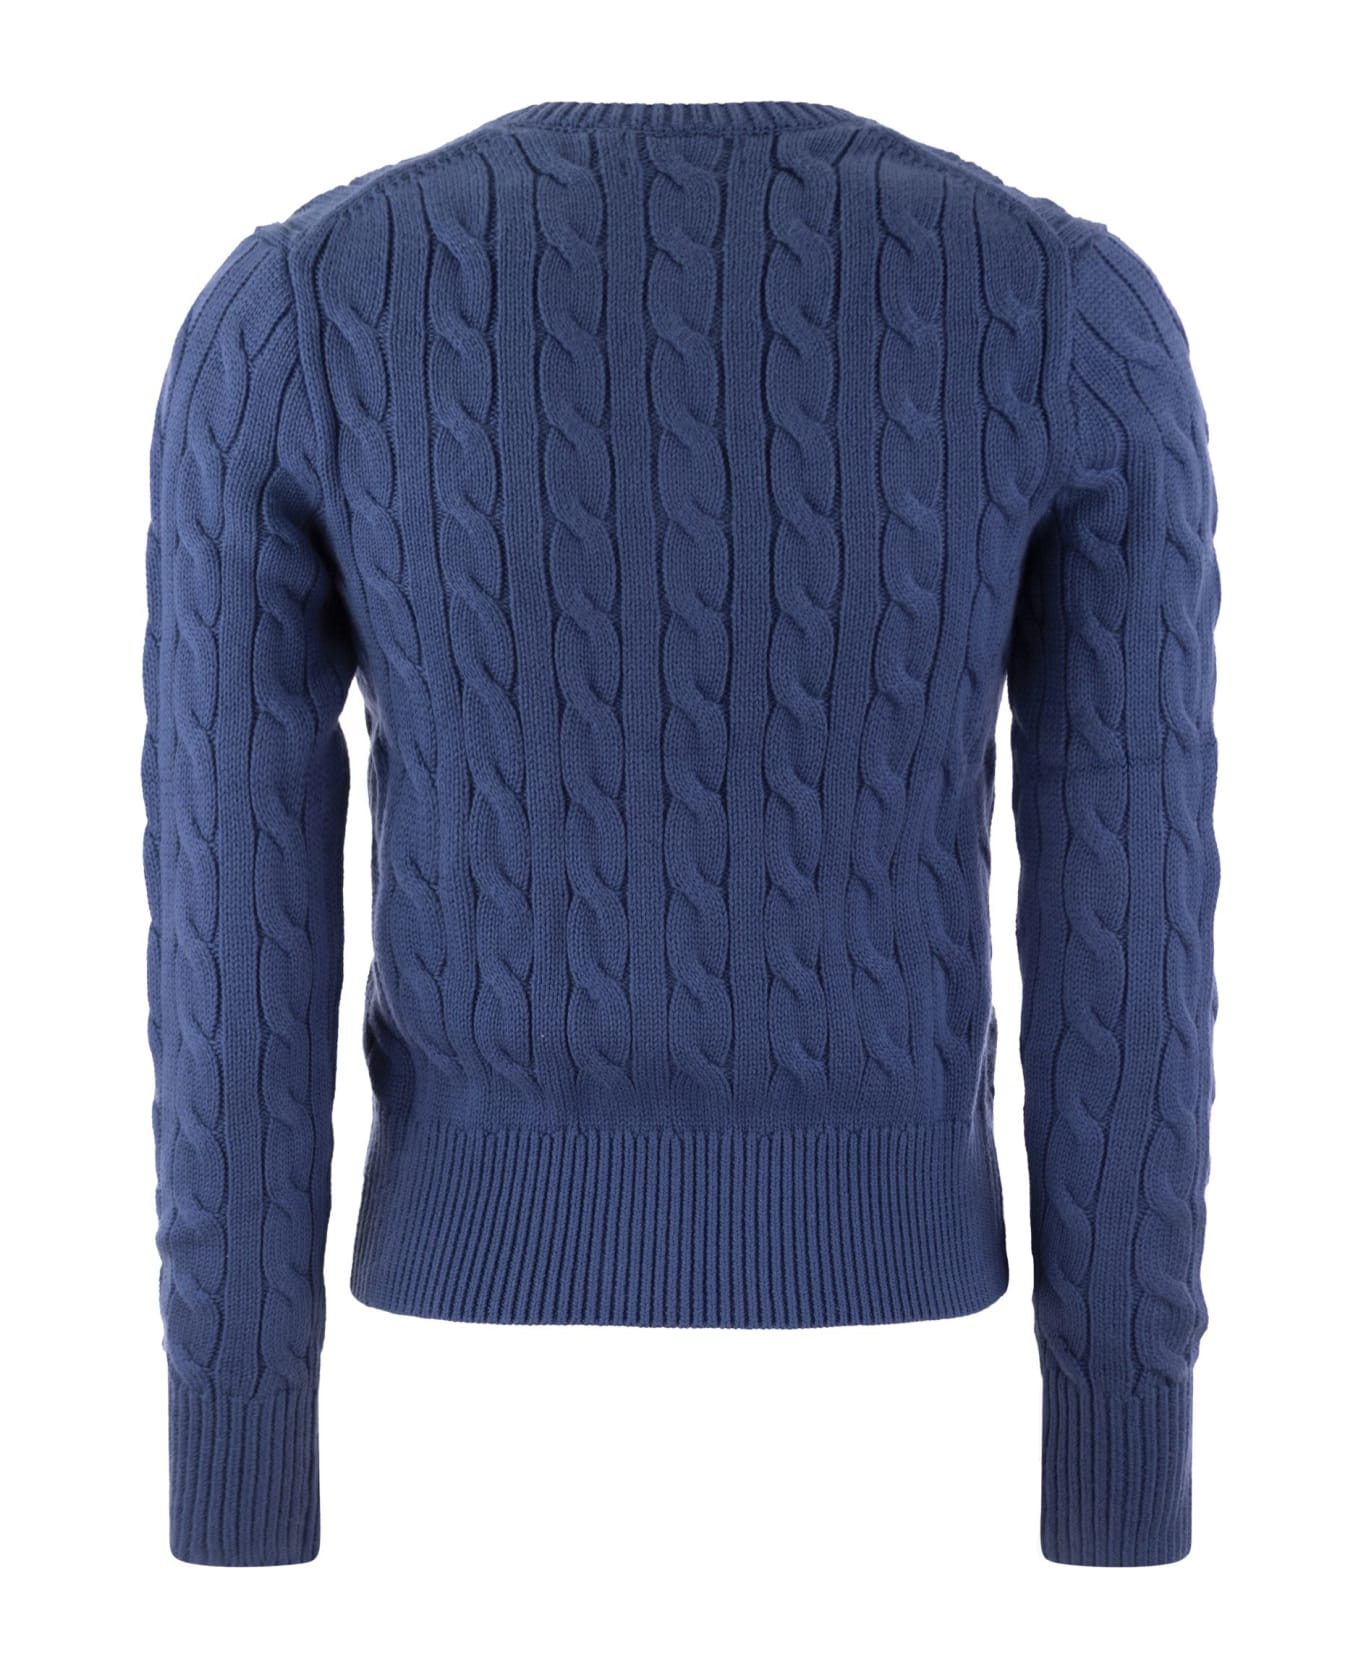 Polo Ralph Lauren Plaited Cardigan With Long Sleeves - Blue